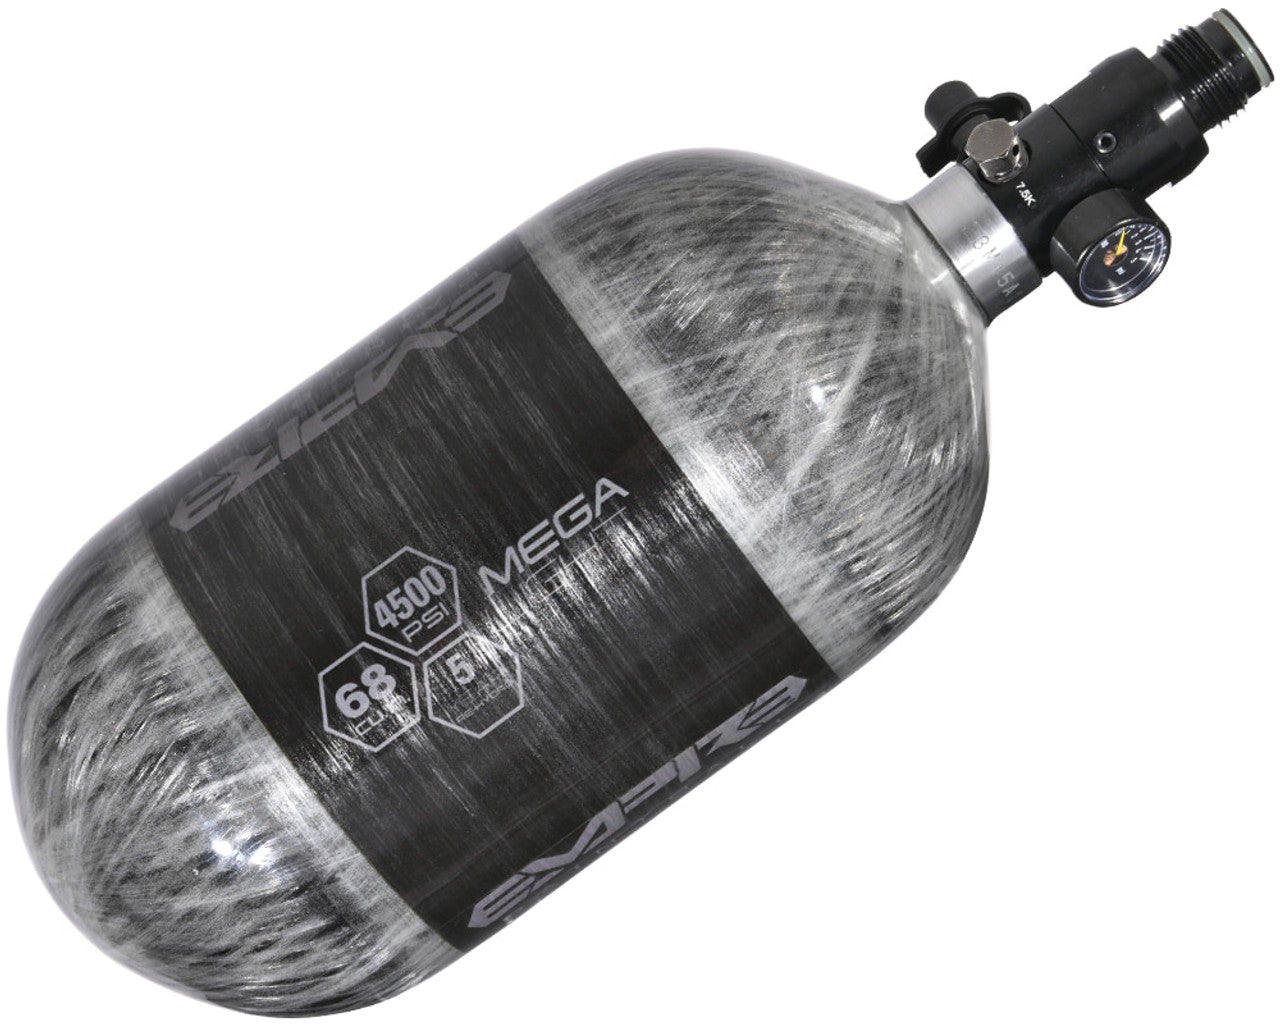 4500 Compressed Air Paintball Tank - Grey - Eminent Paintball And Airsoft